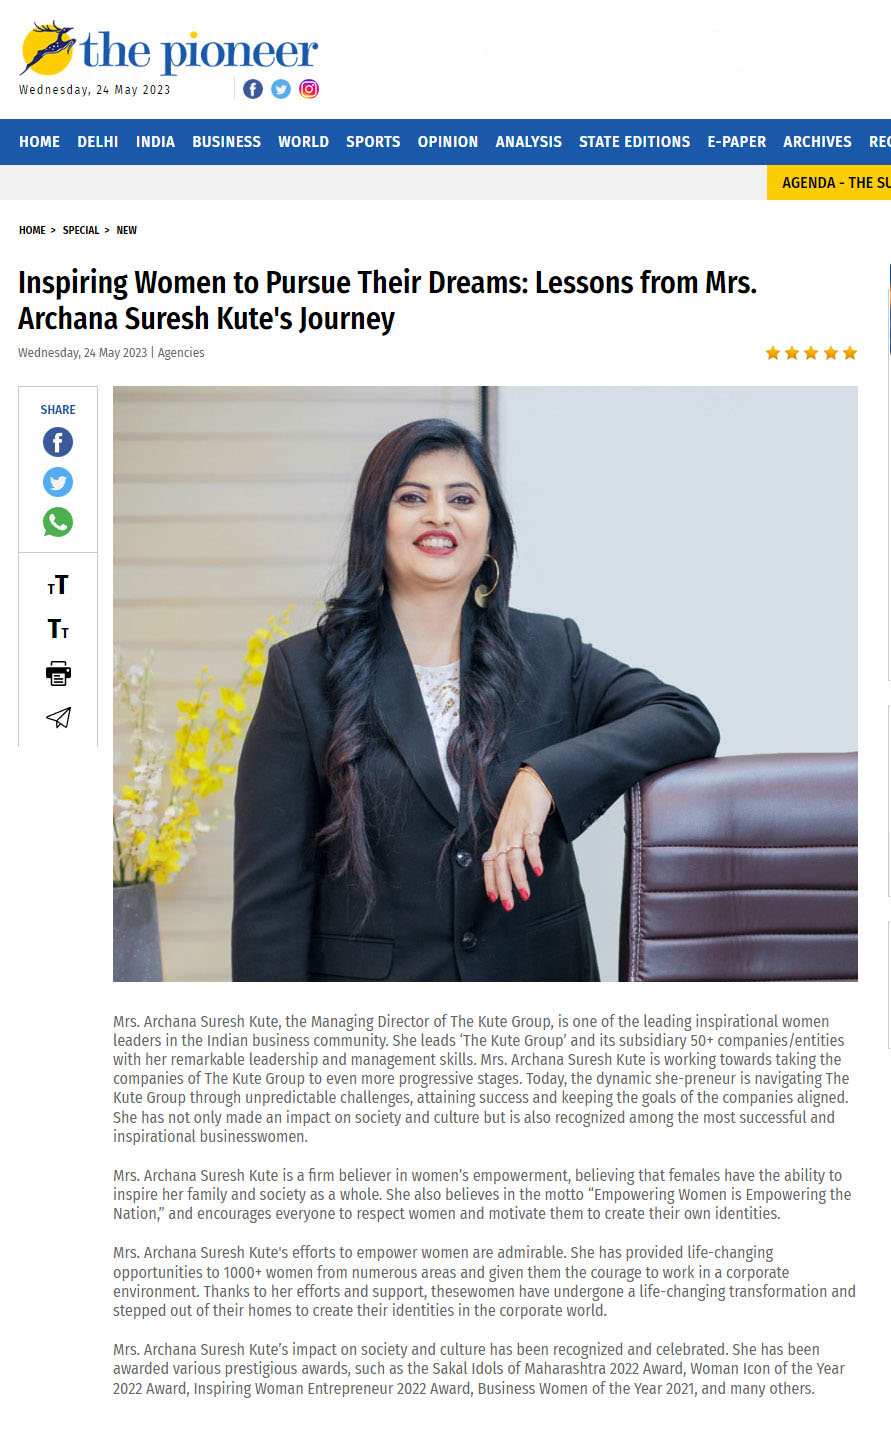 Inspiring Women to Pursue Their Dreams: Lessons from Mrs. Archana Suresh Kute’s Journey